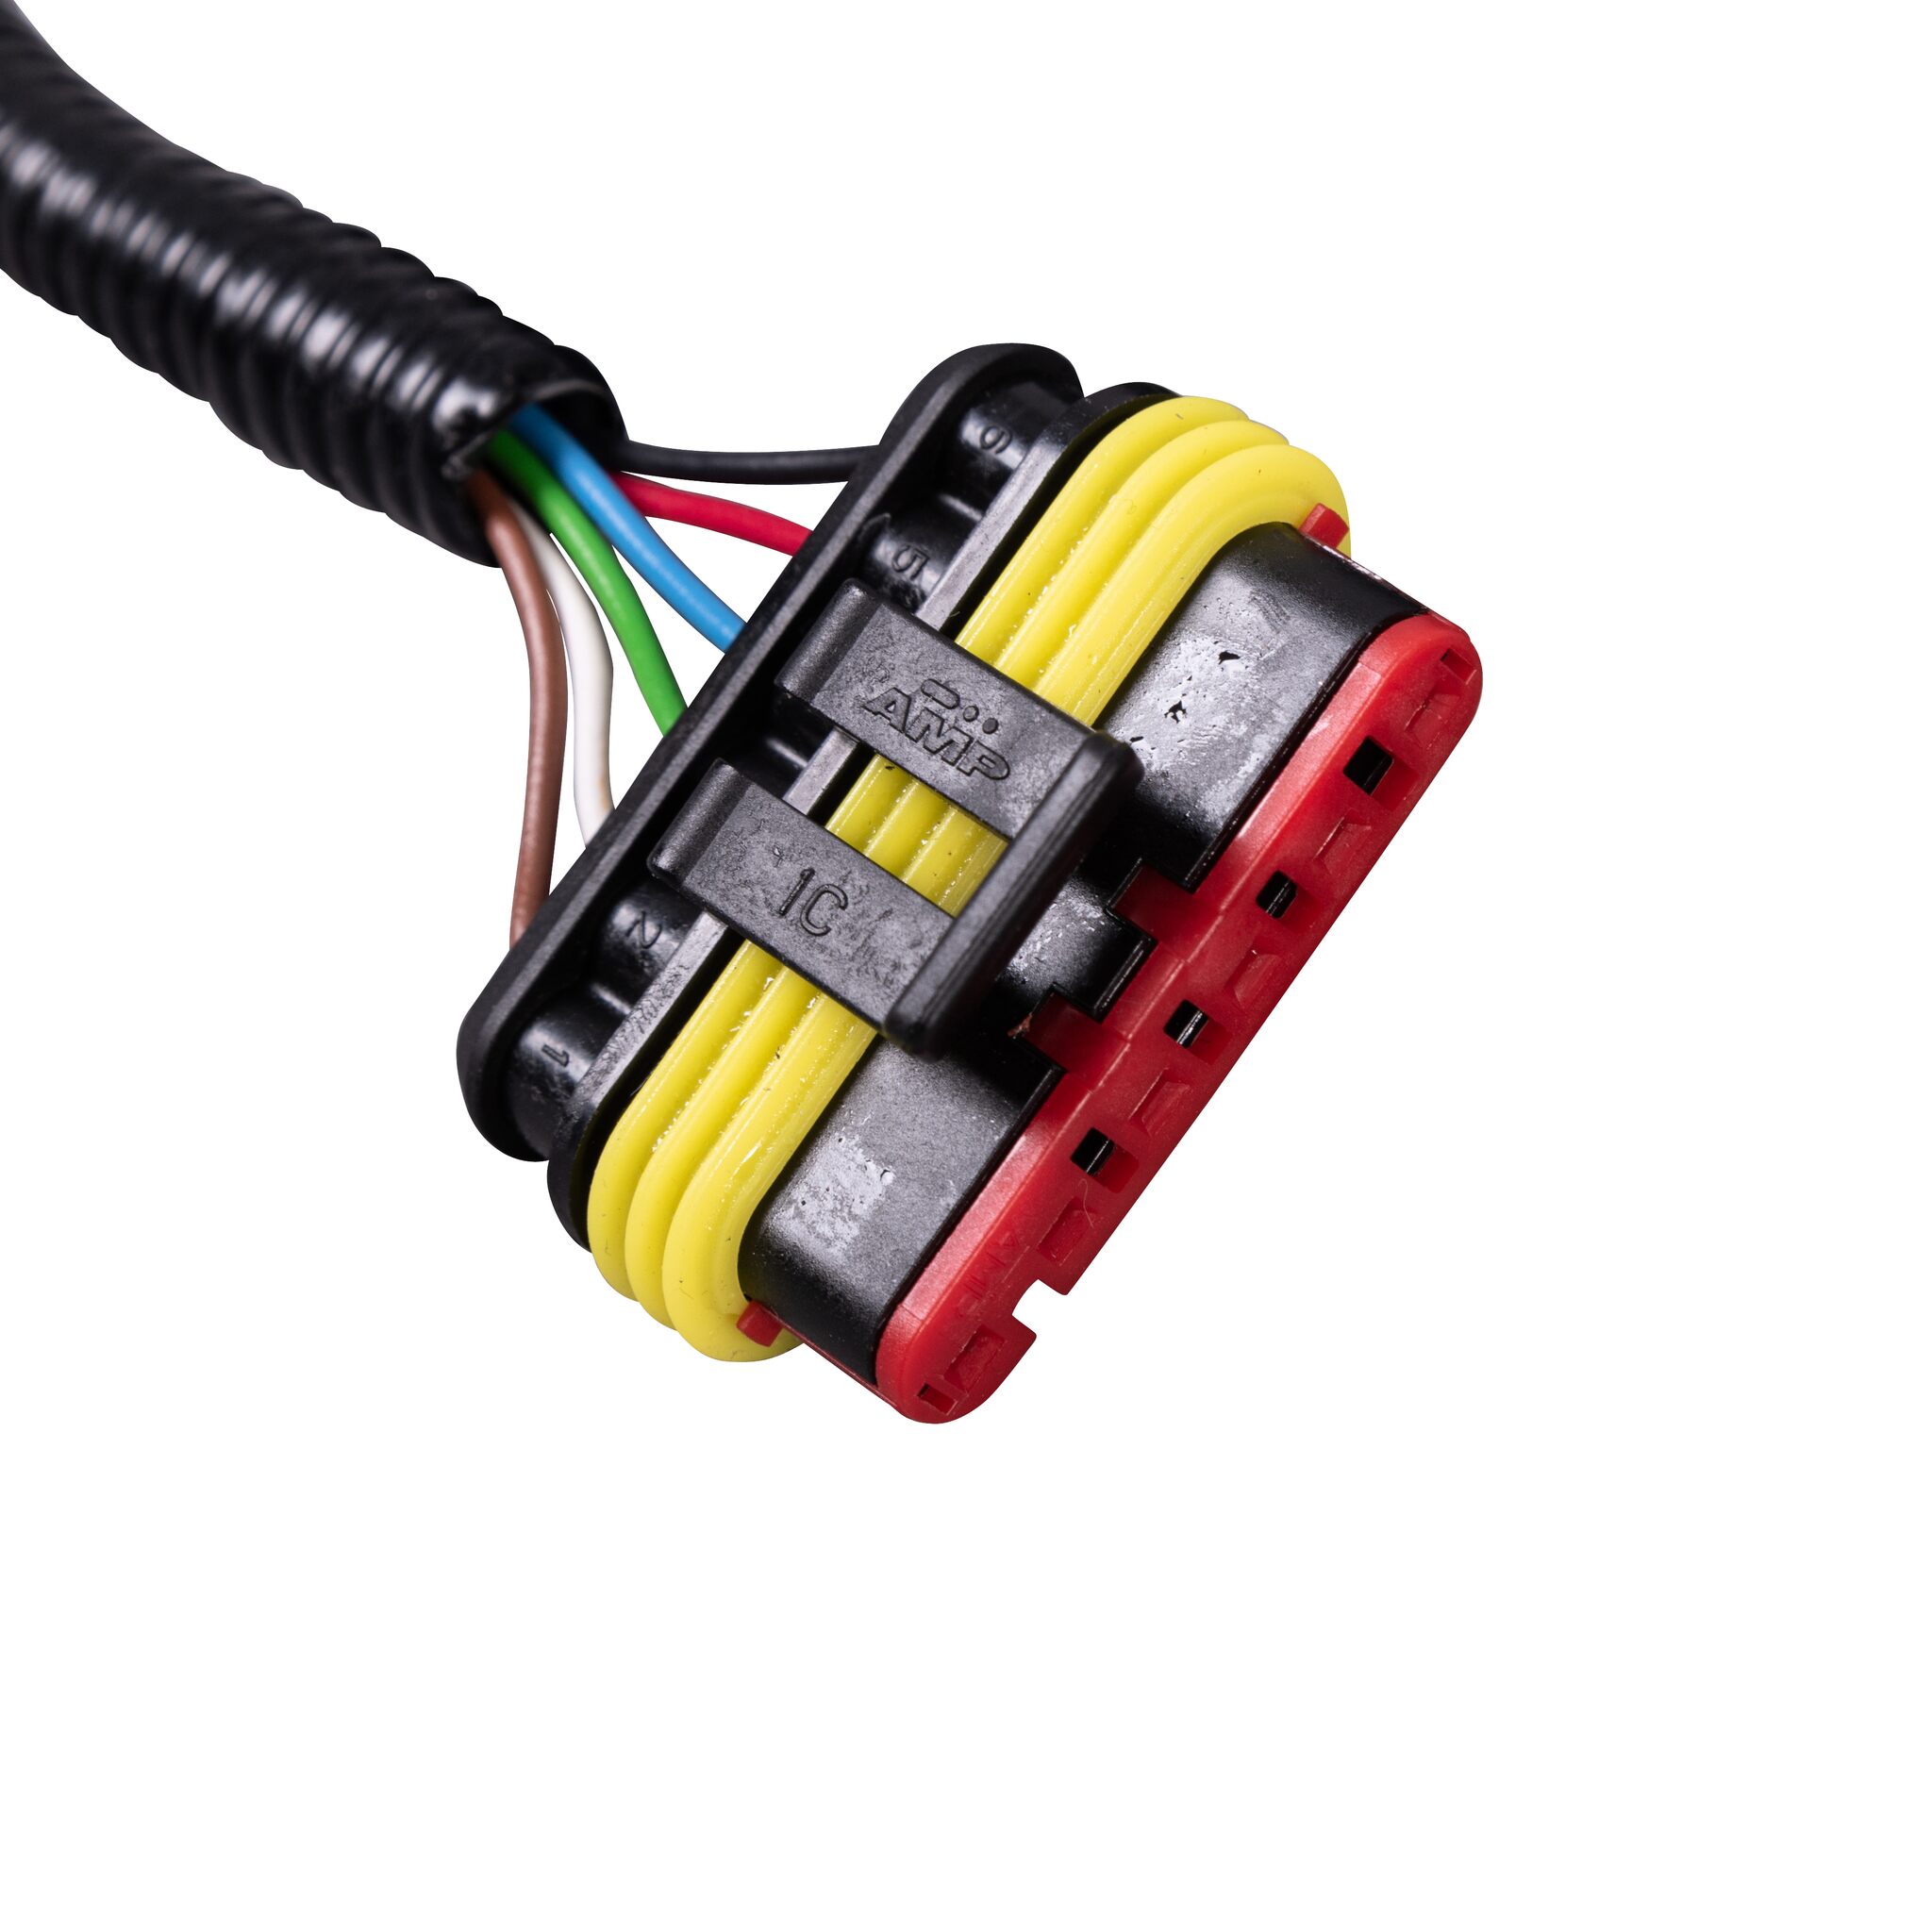 Extension cable for PU 5 control panel